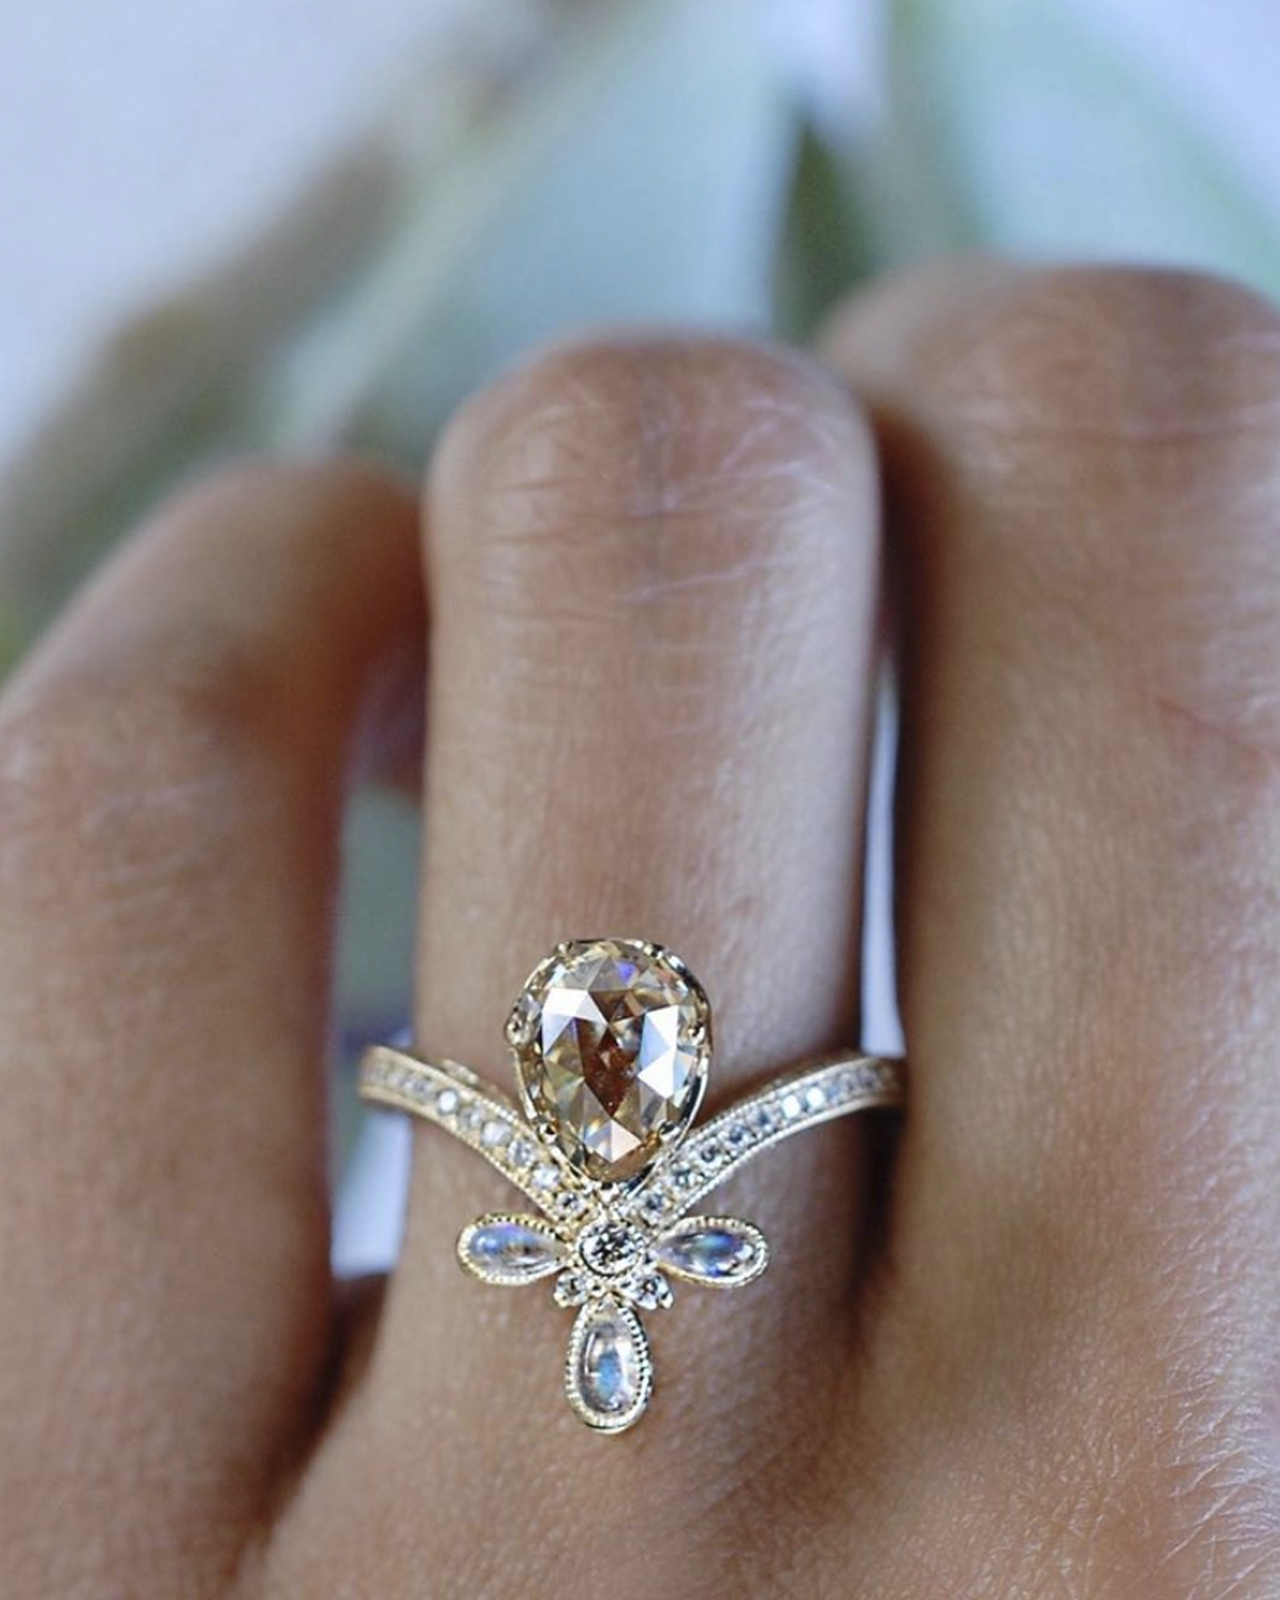 Lauren B Jewelry | NYC Jewelry Store - Engagement Rings & Wedding Bands